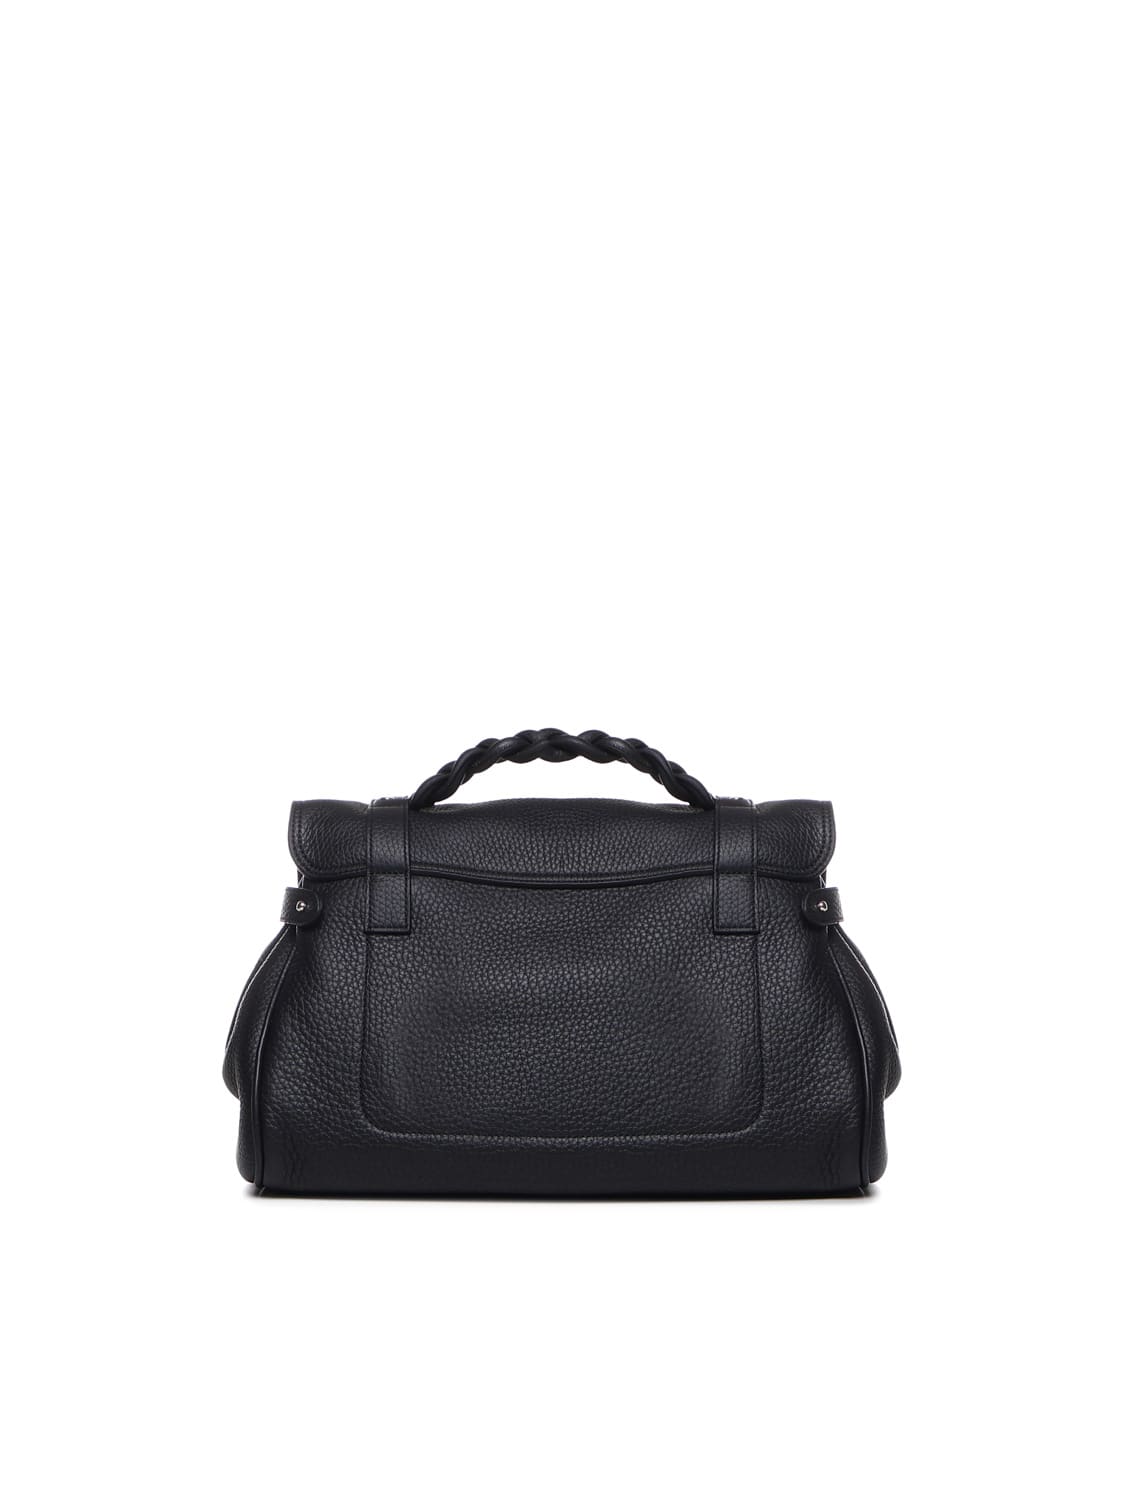 Shop Mulberry Alexa Bag With Leather Braided Handle In Black